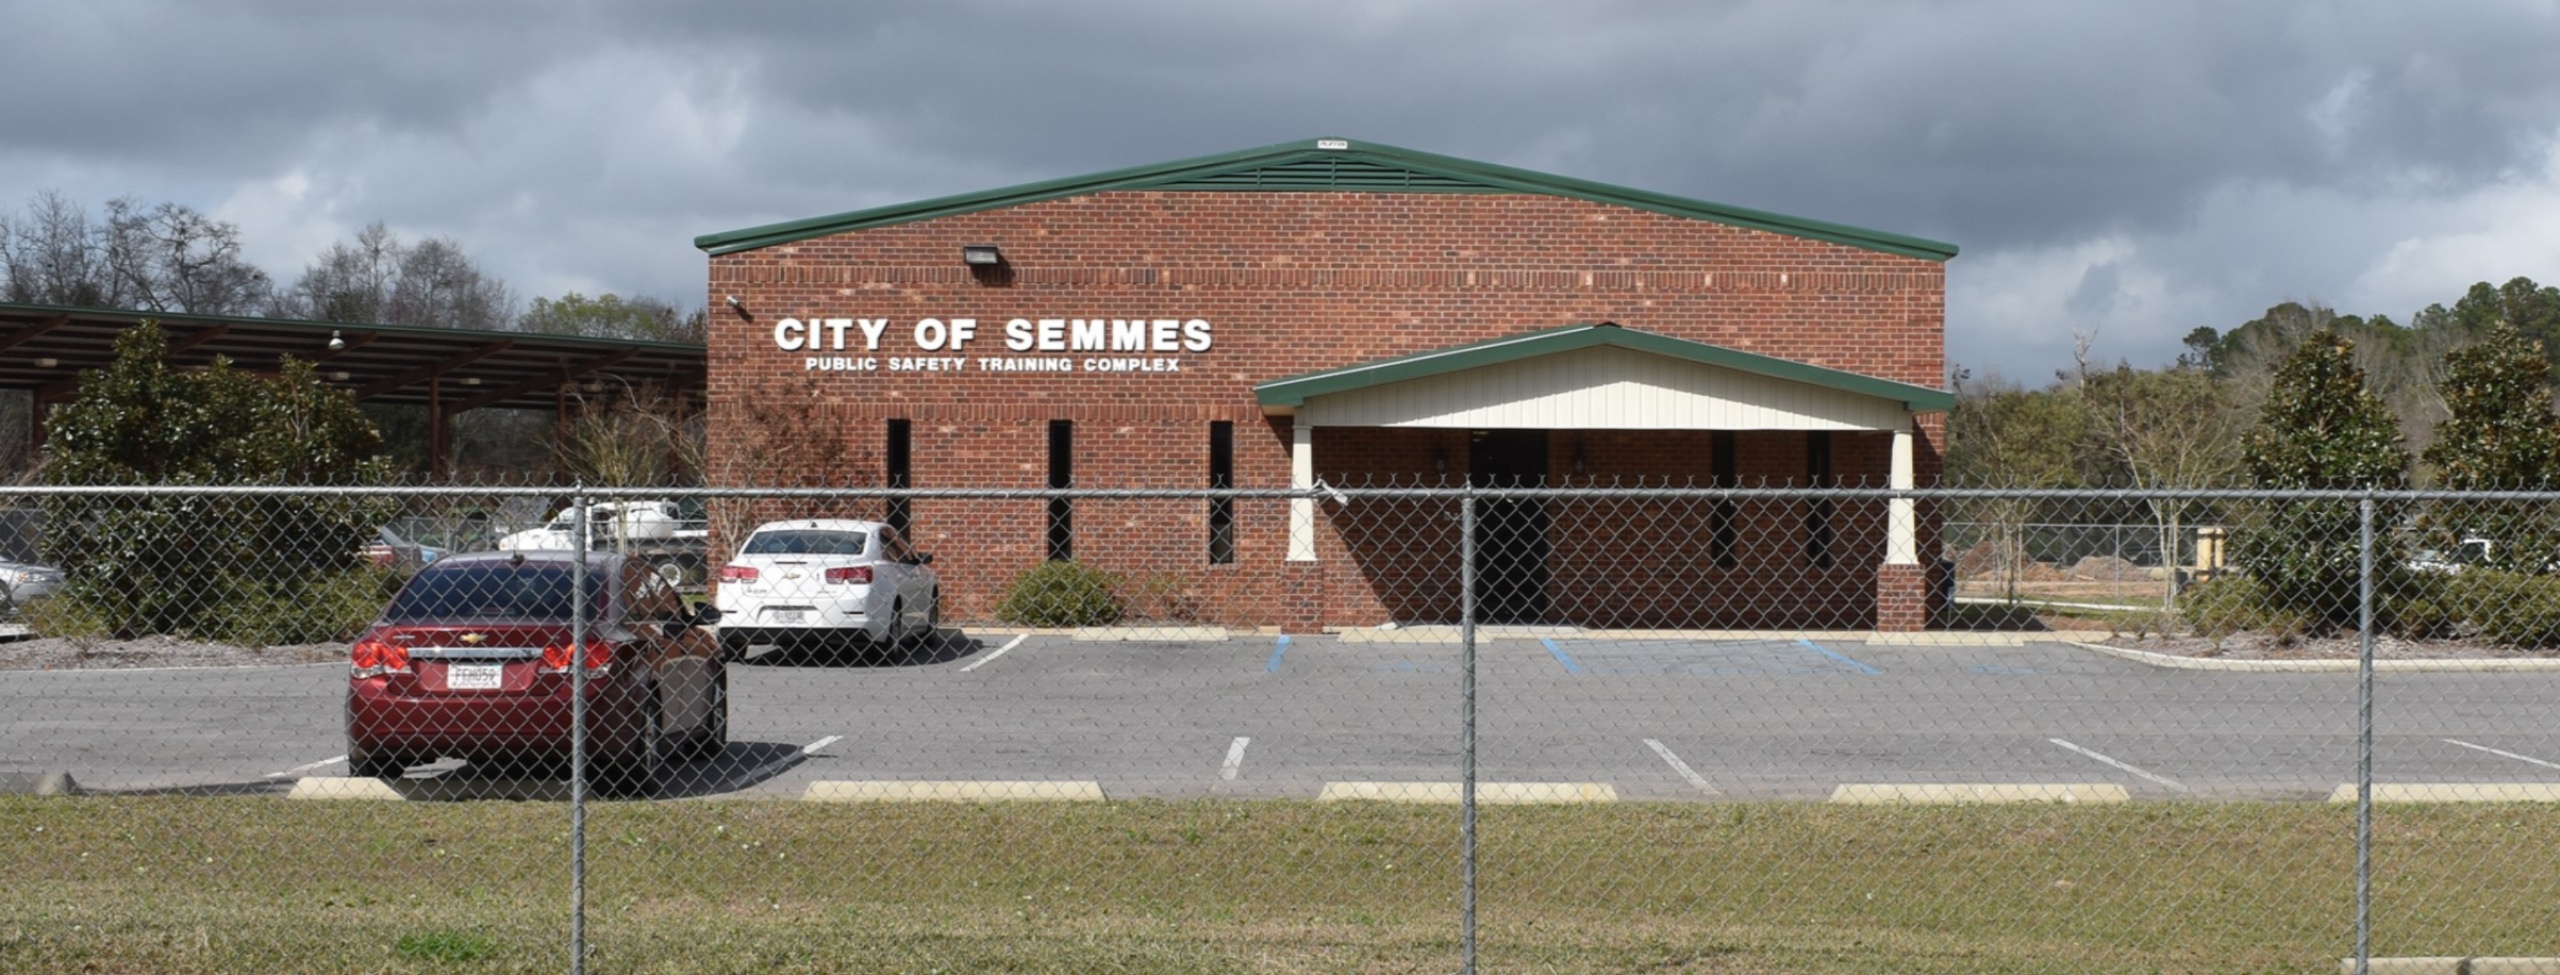 Front of the Semmes campus building